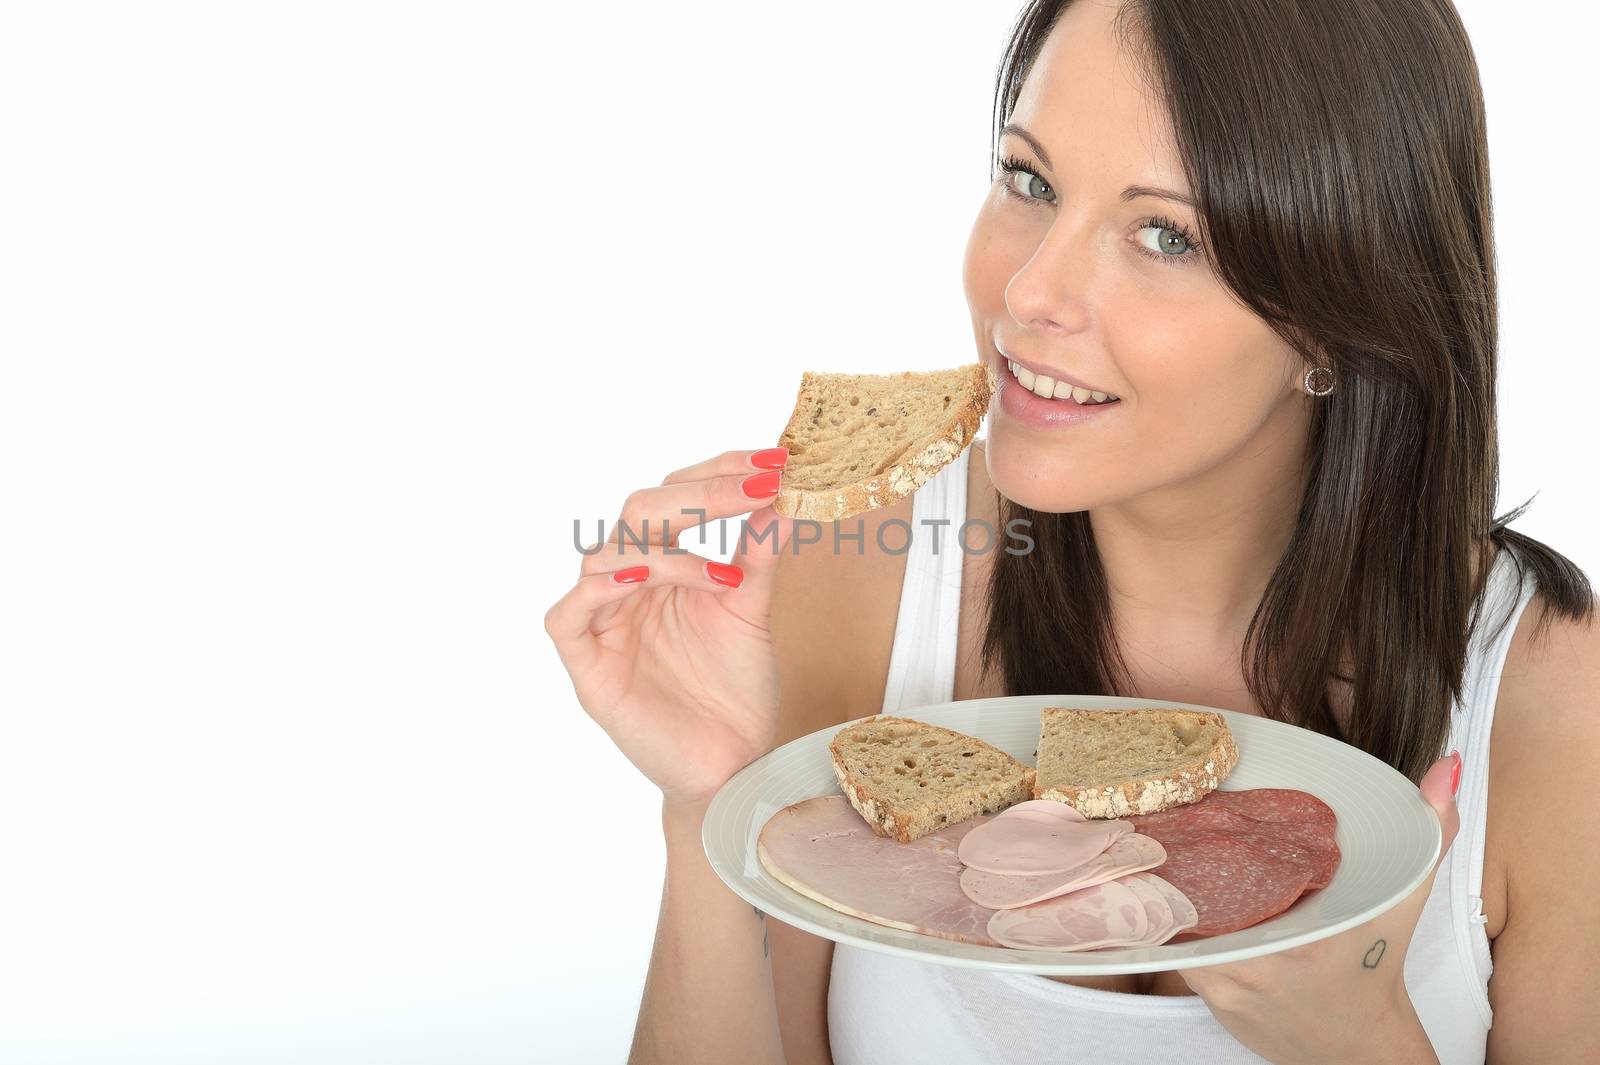 Healthy Attractive Young Woman Holding a Typical Norwegian Style Cold Buffet Breakfast of Meats and Bread